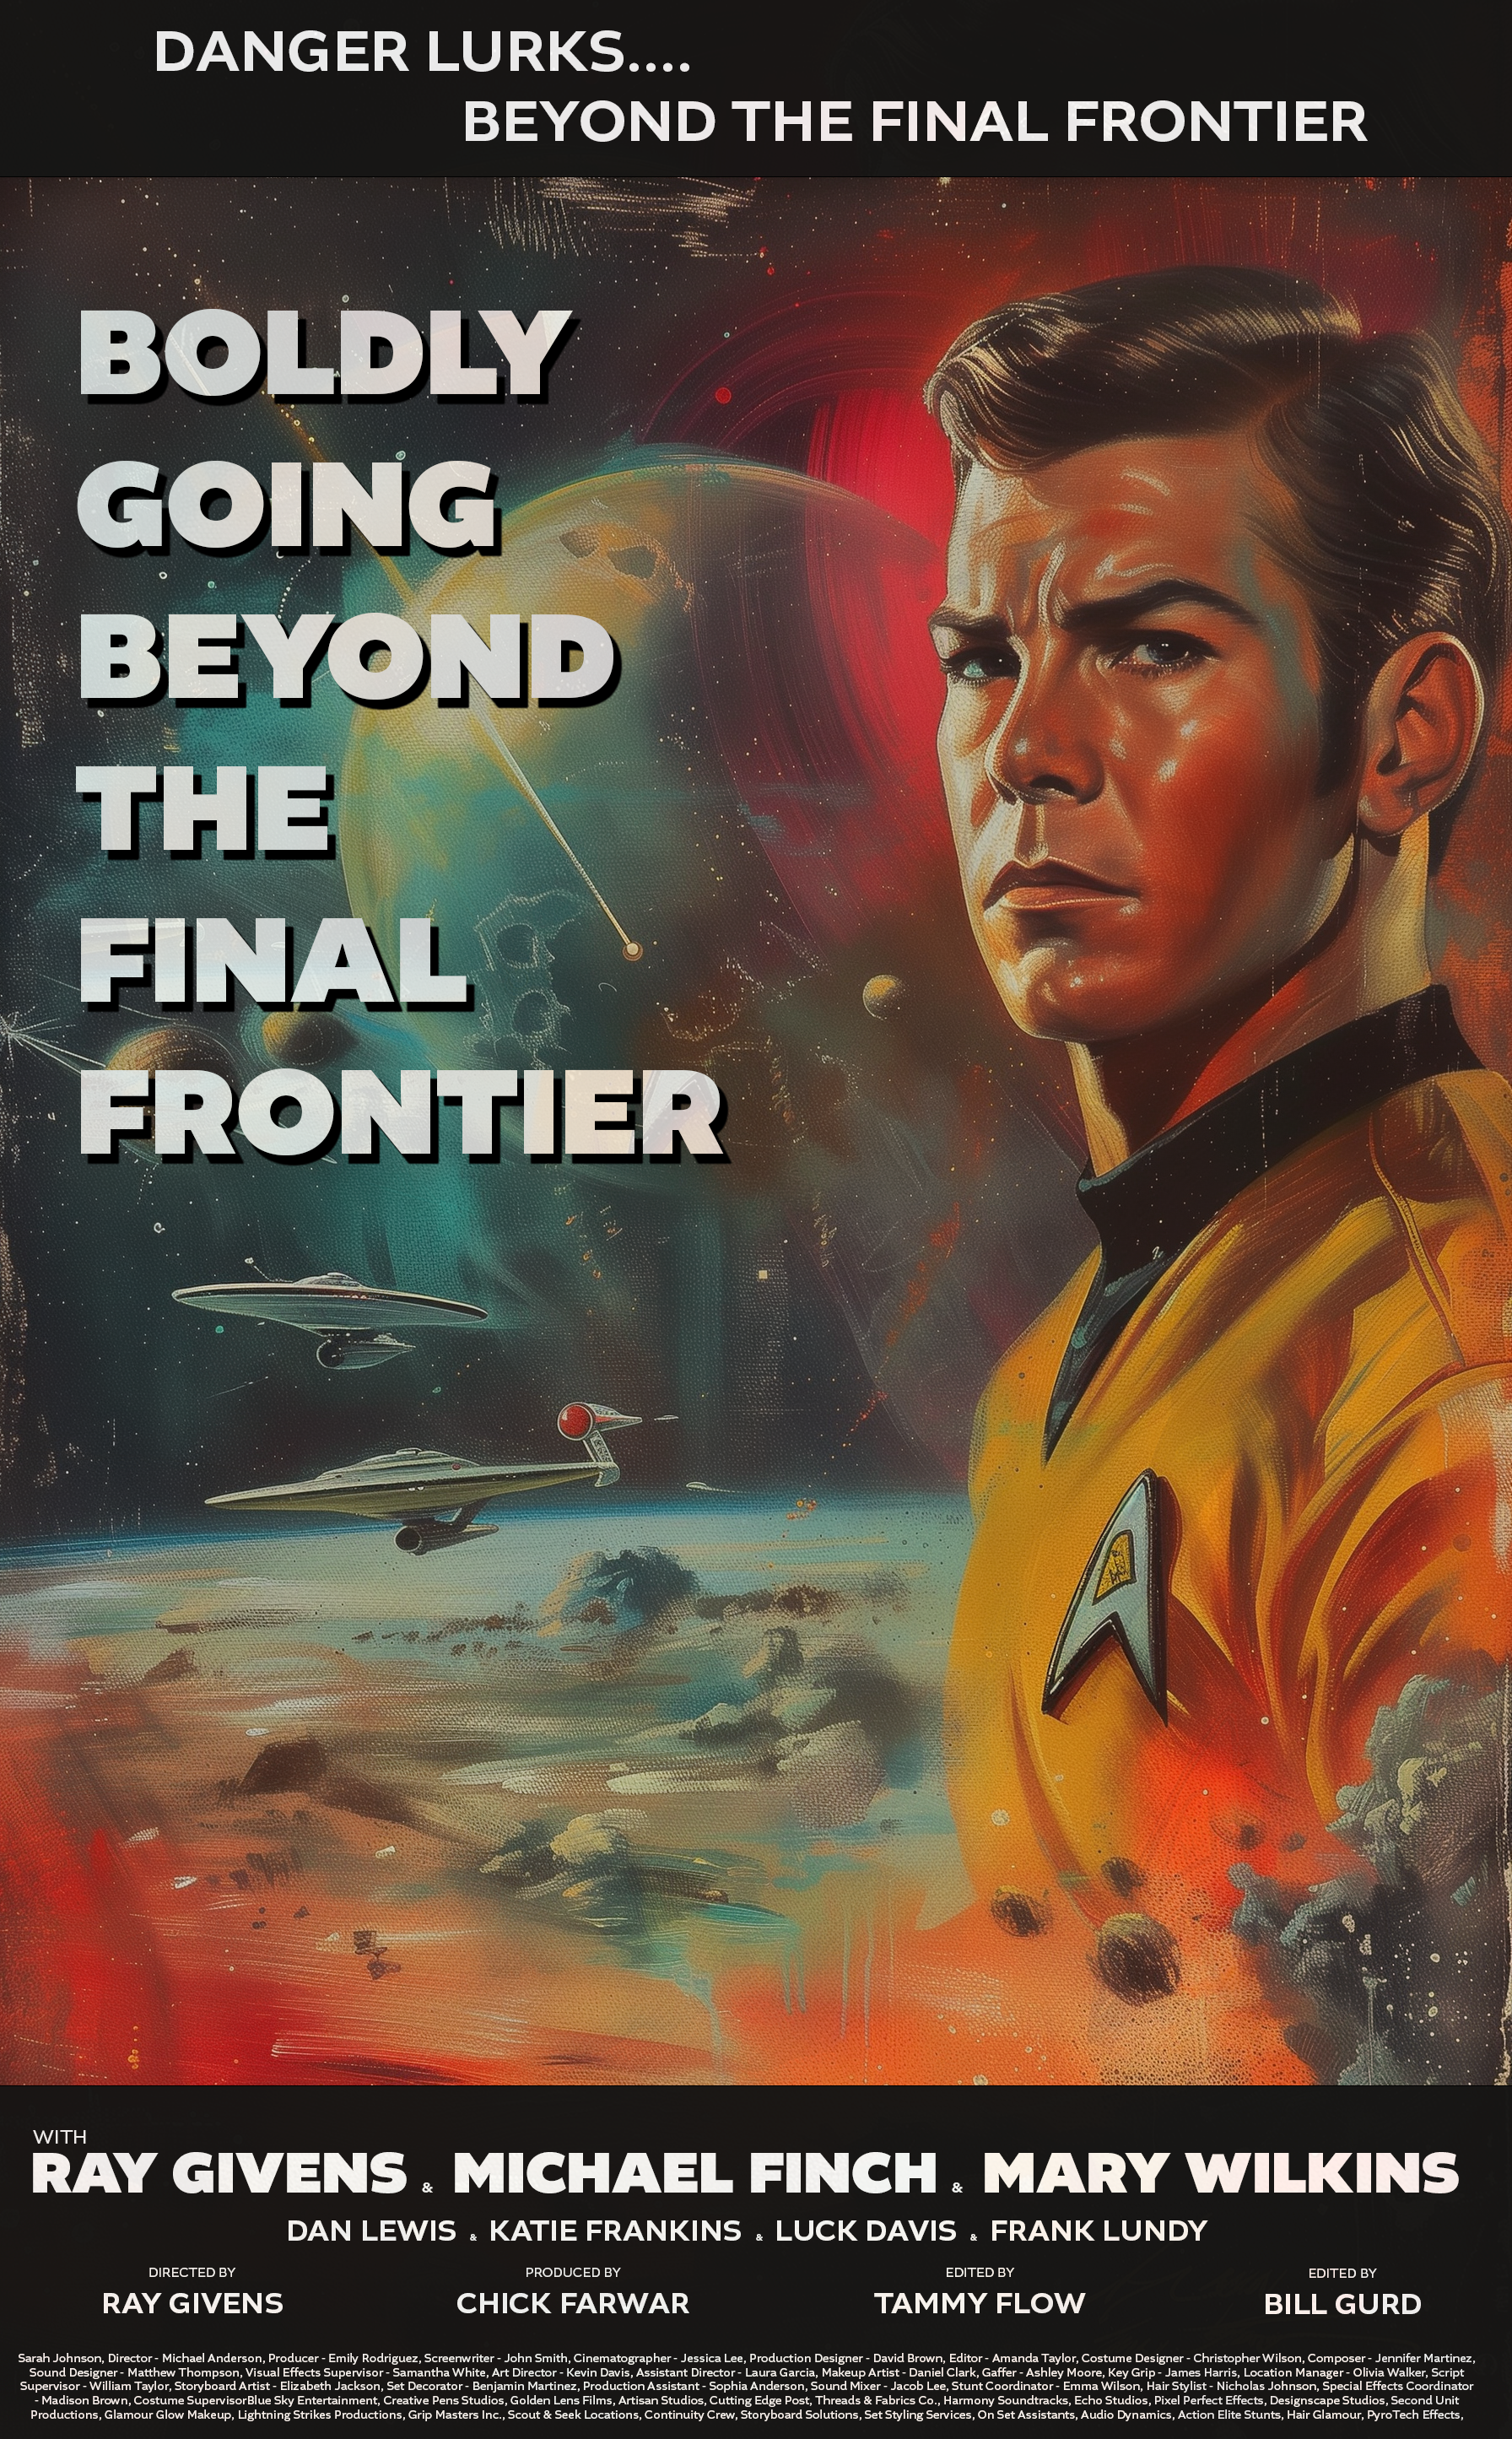 Name:  Beyond the Final Frontier.png
Views: 135
Size:  8.19 MB